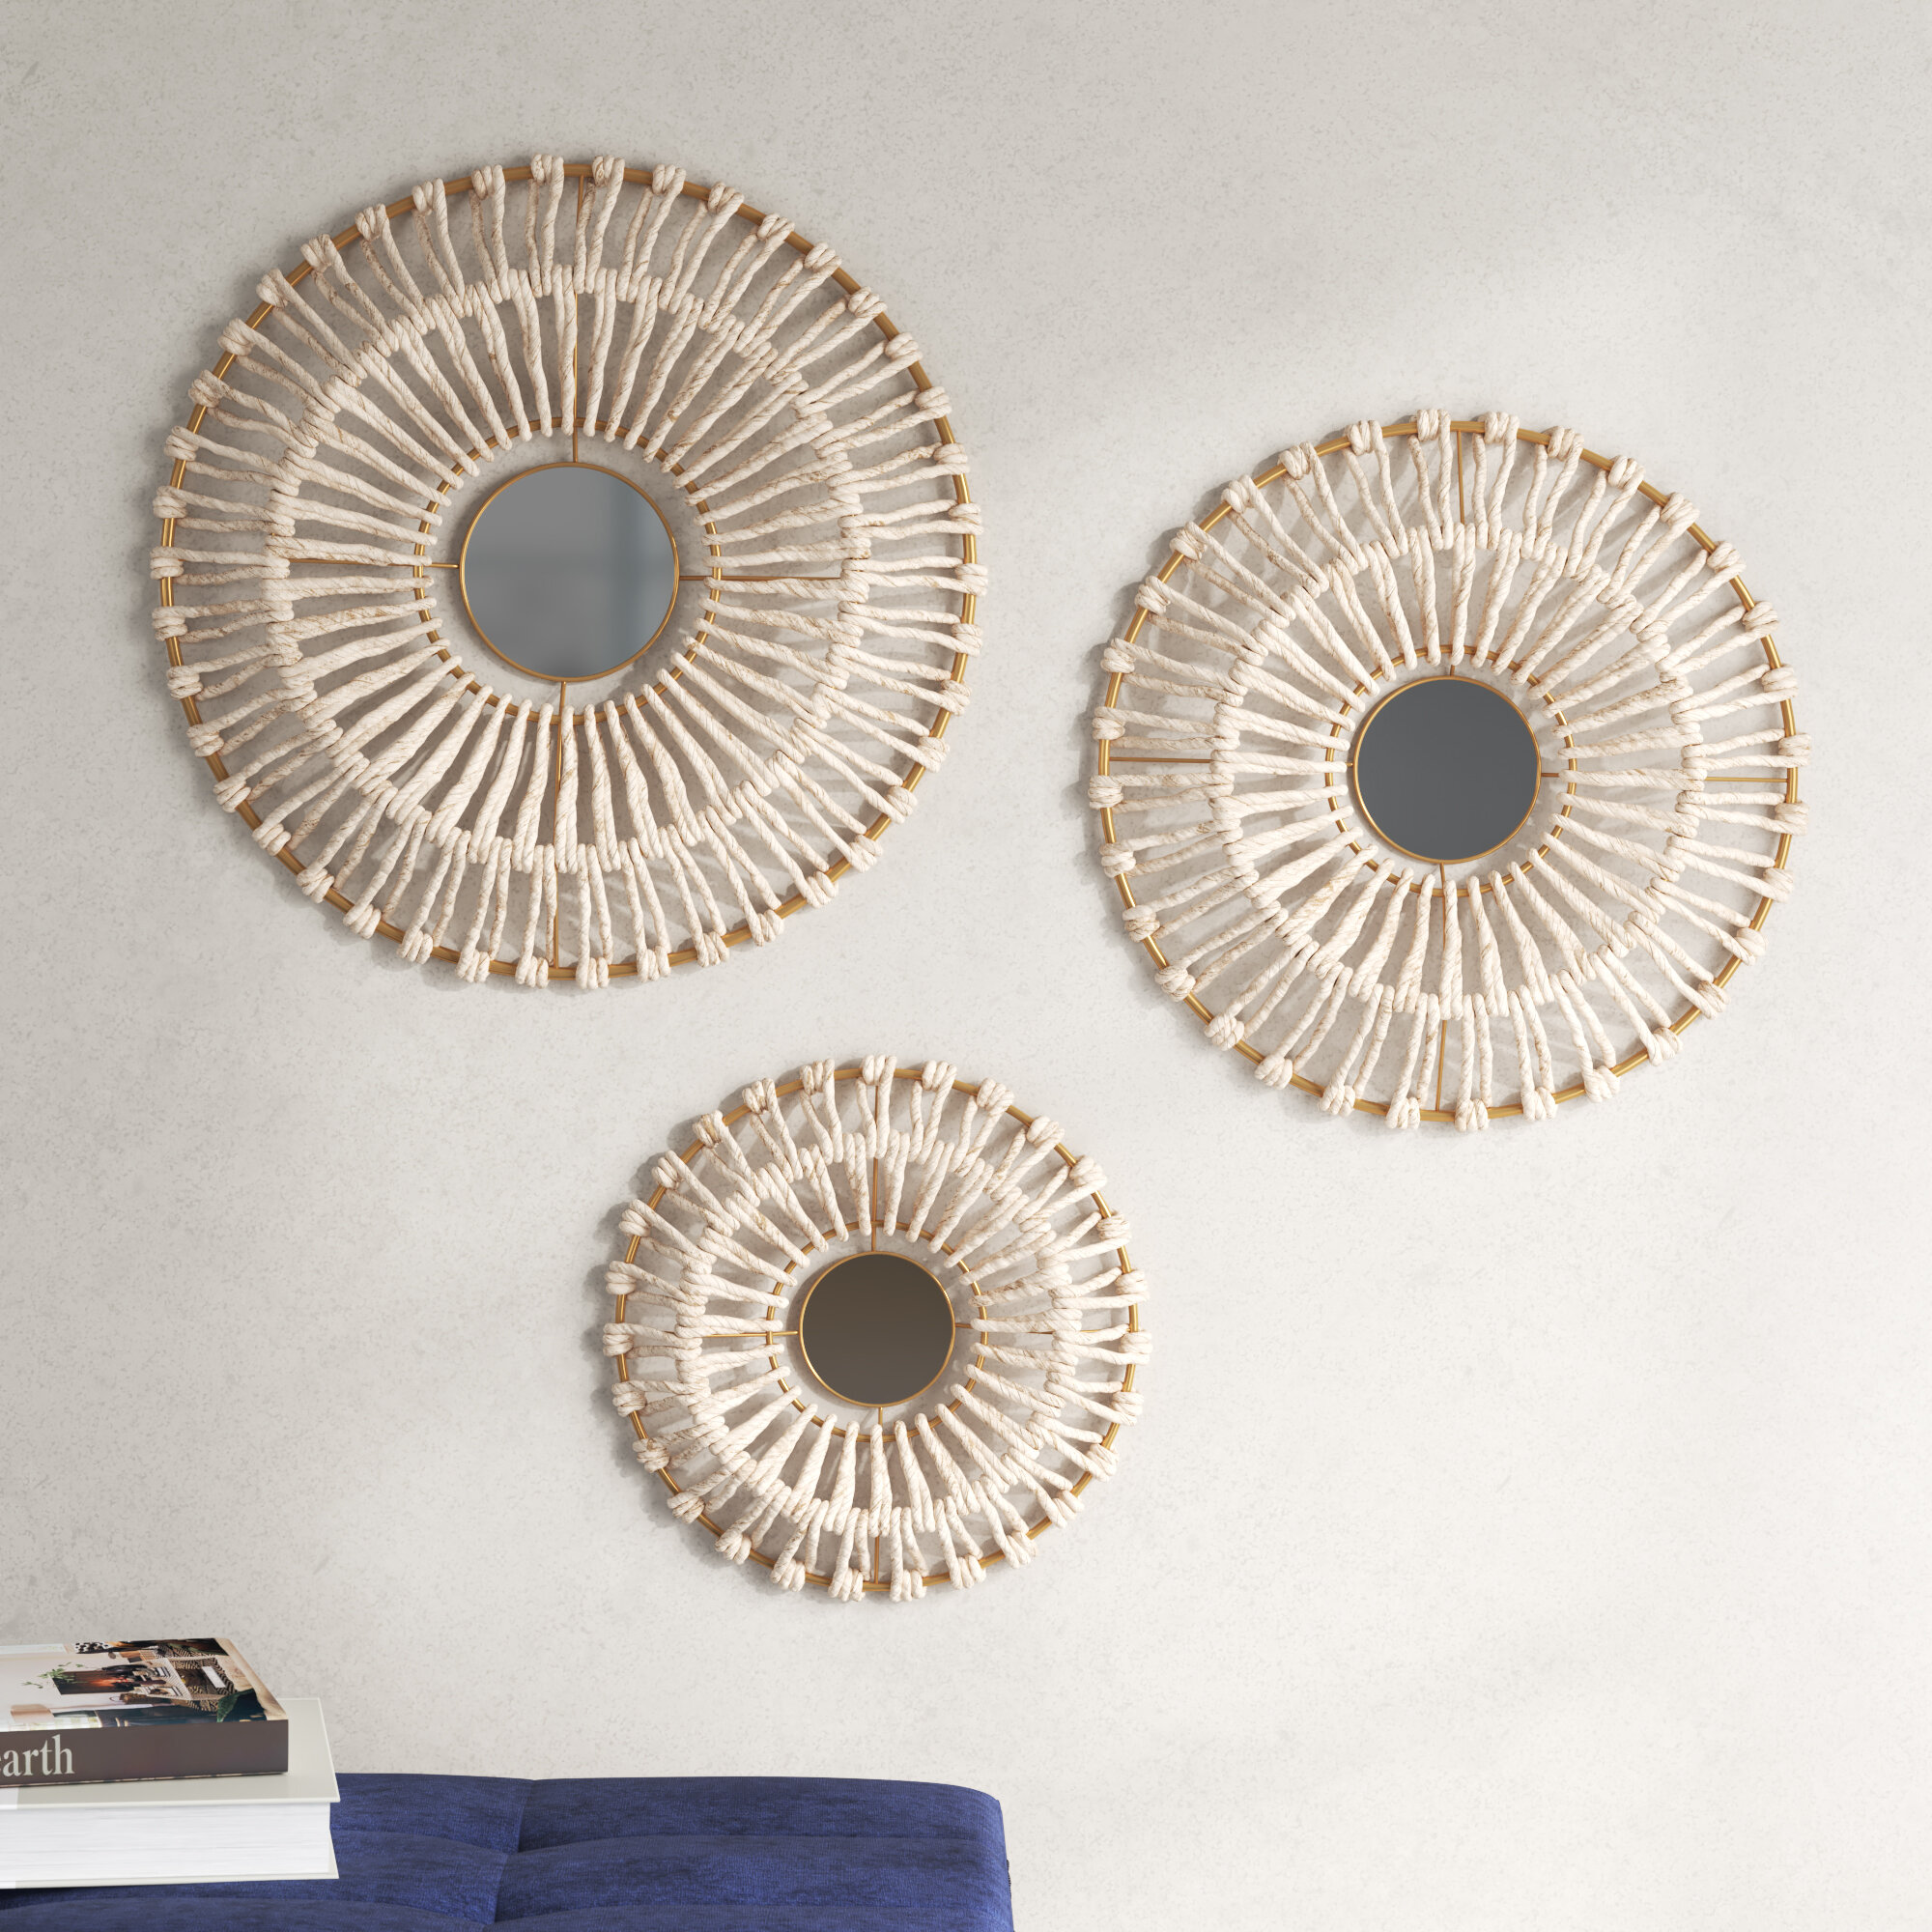 Decorative Circle Mirrors for sale in Chagrin Falls, Ohio